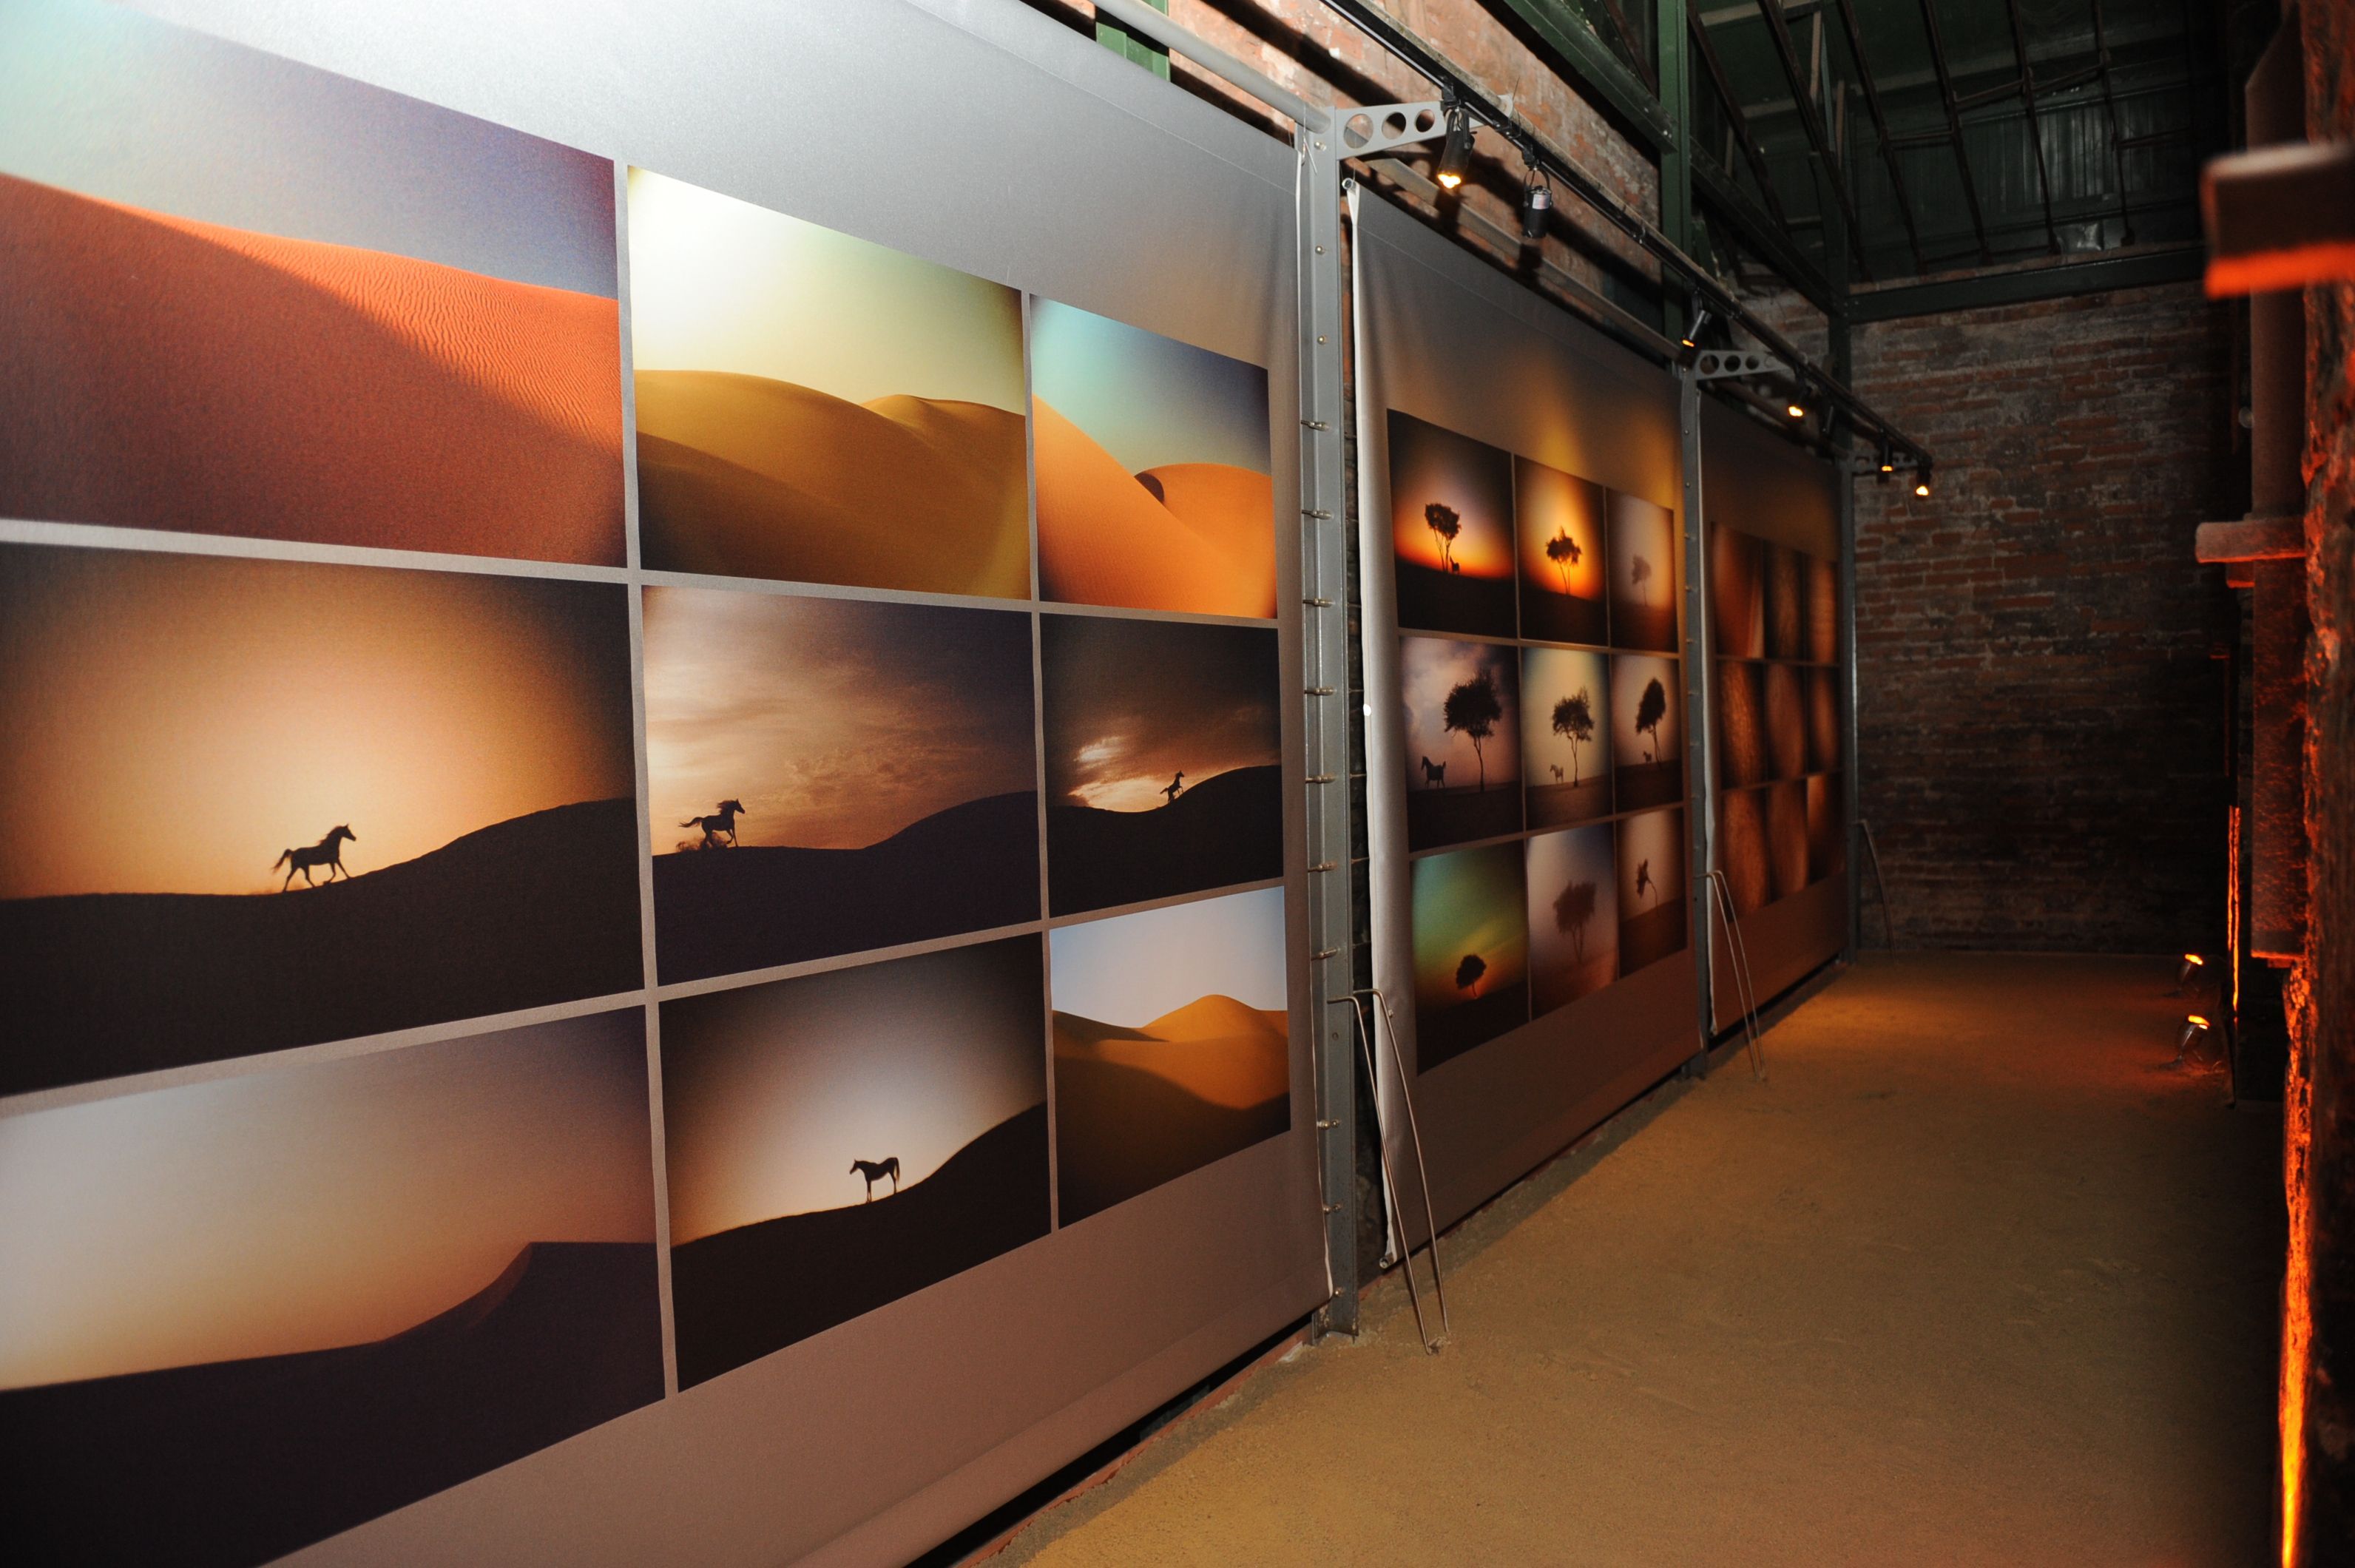 A gallery space with painted photographs along the wall, depicting a horse running through the desert.